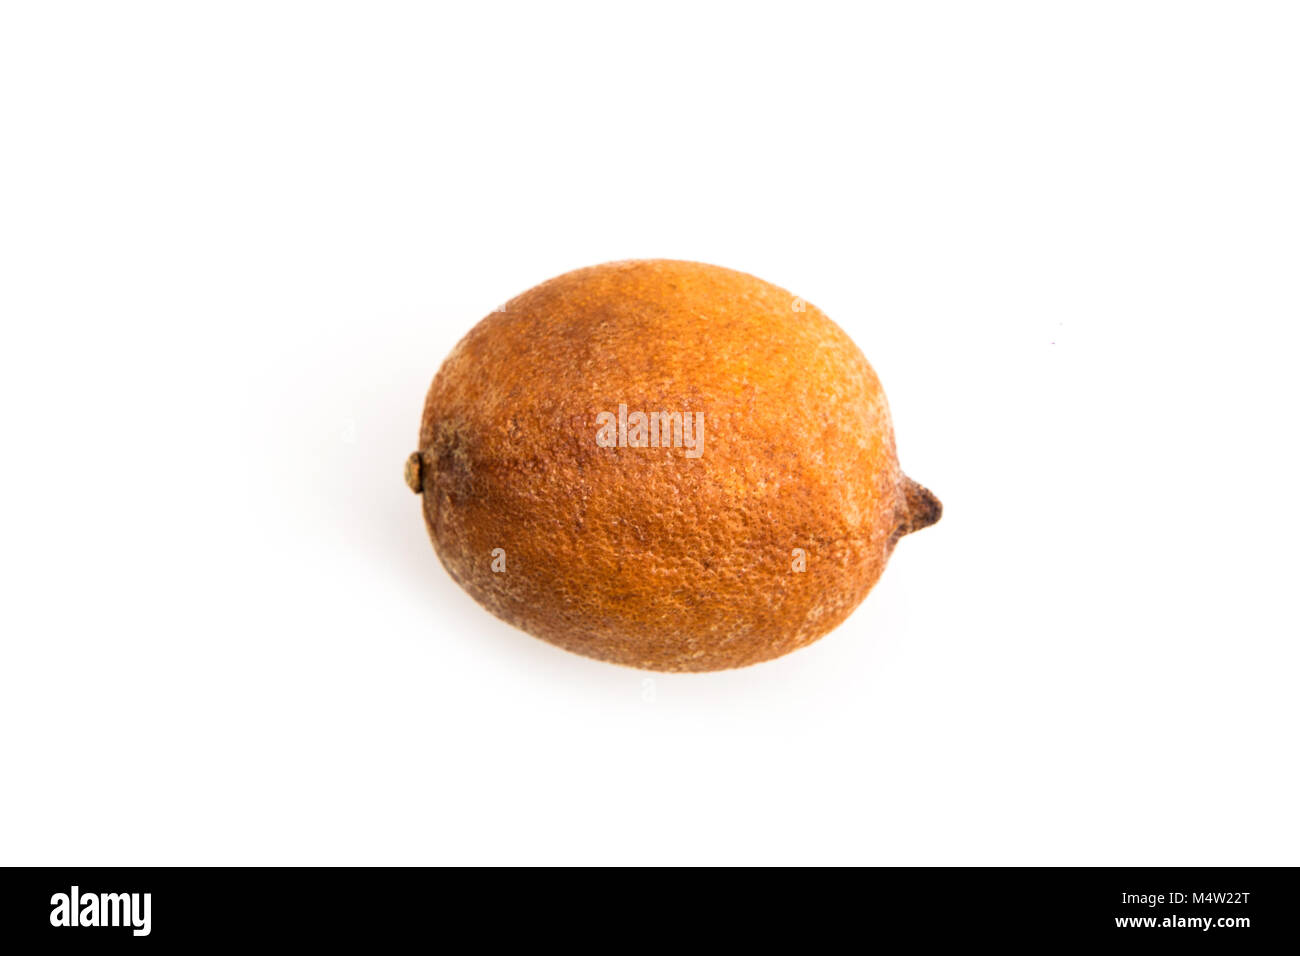 A picture of one old and overripe lemon. The peel is almost dry, but inside the pulp is good and full of vitamins. Stock Photo